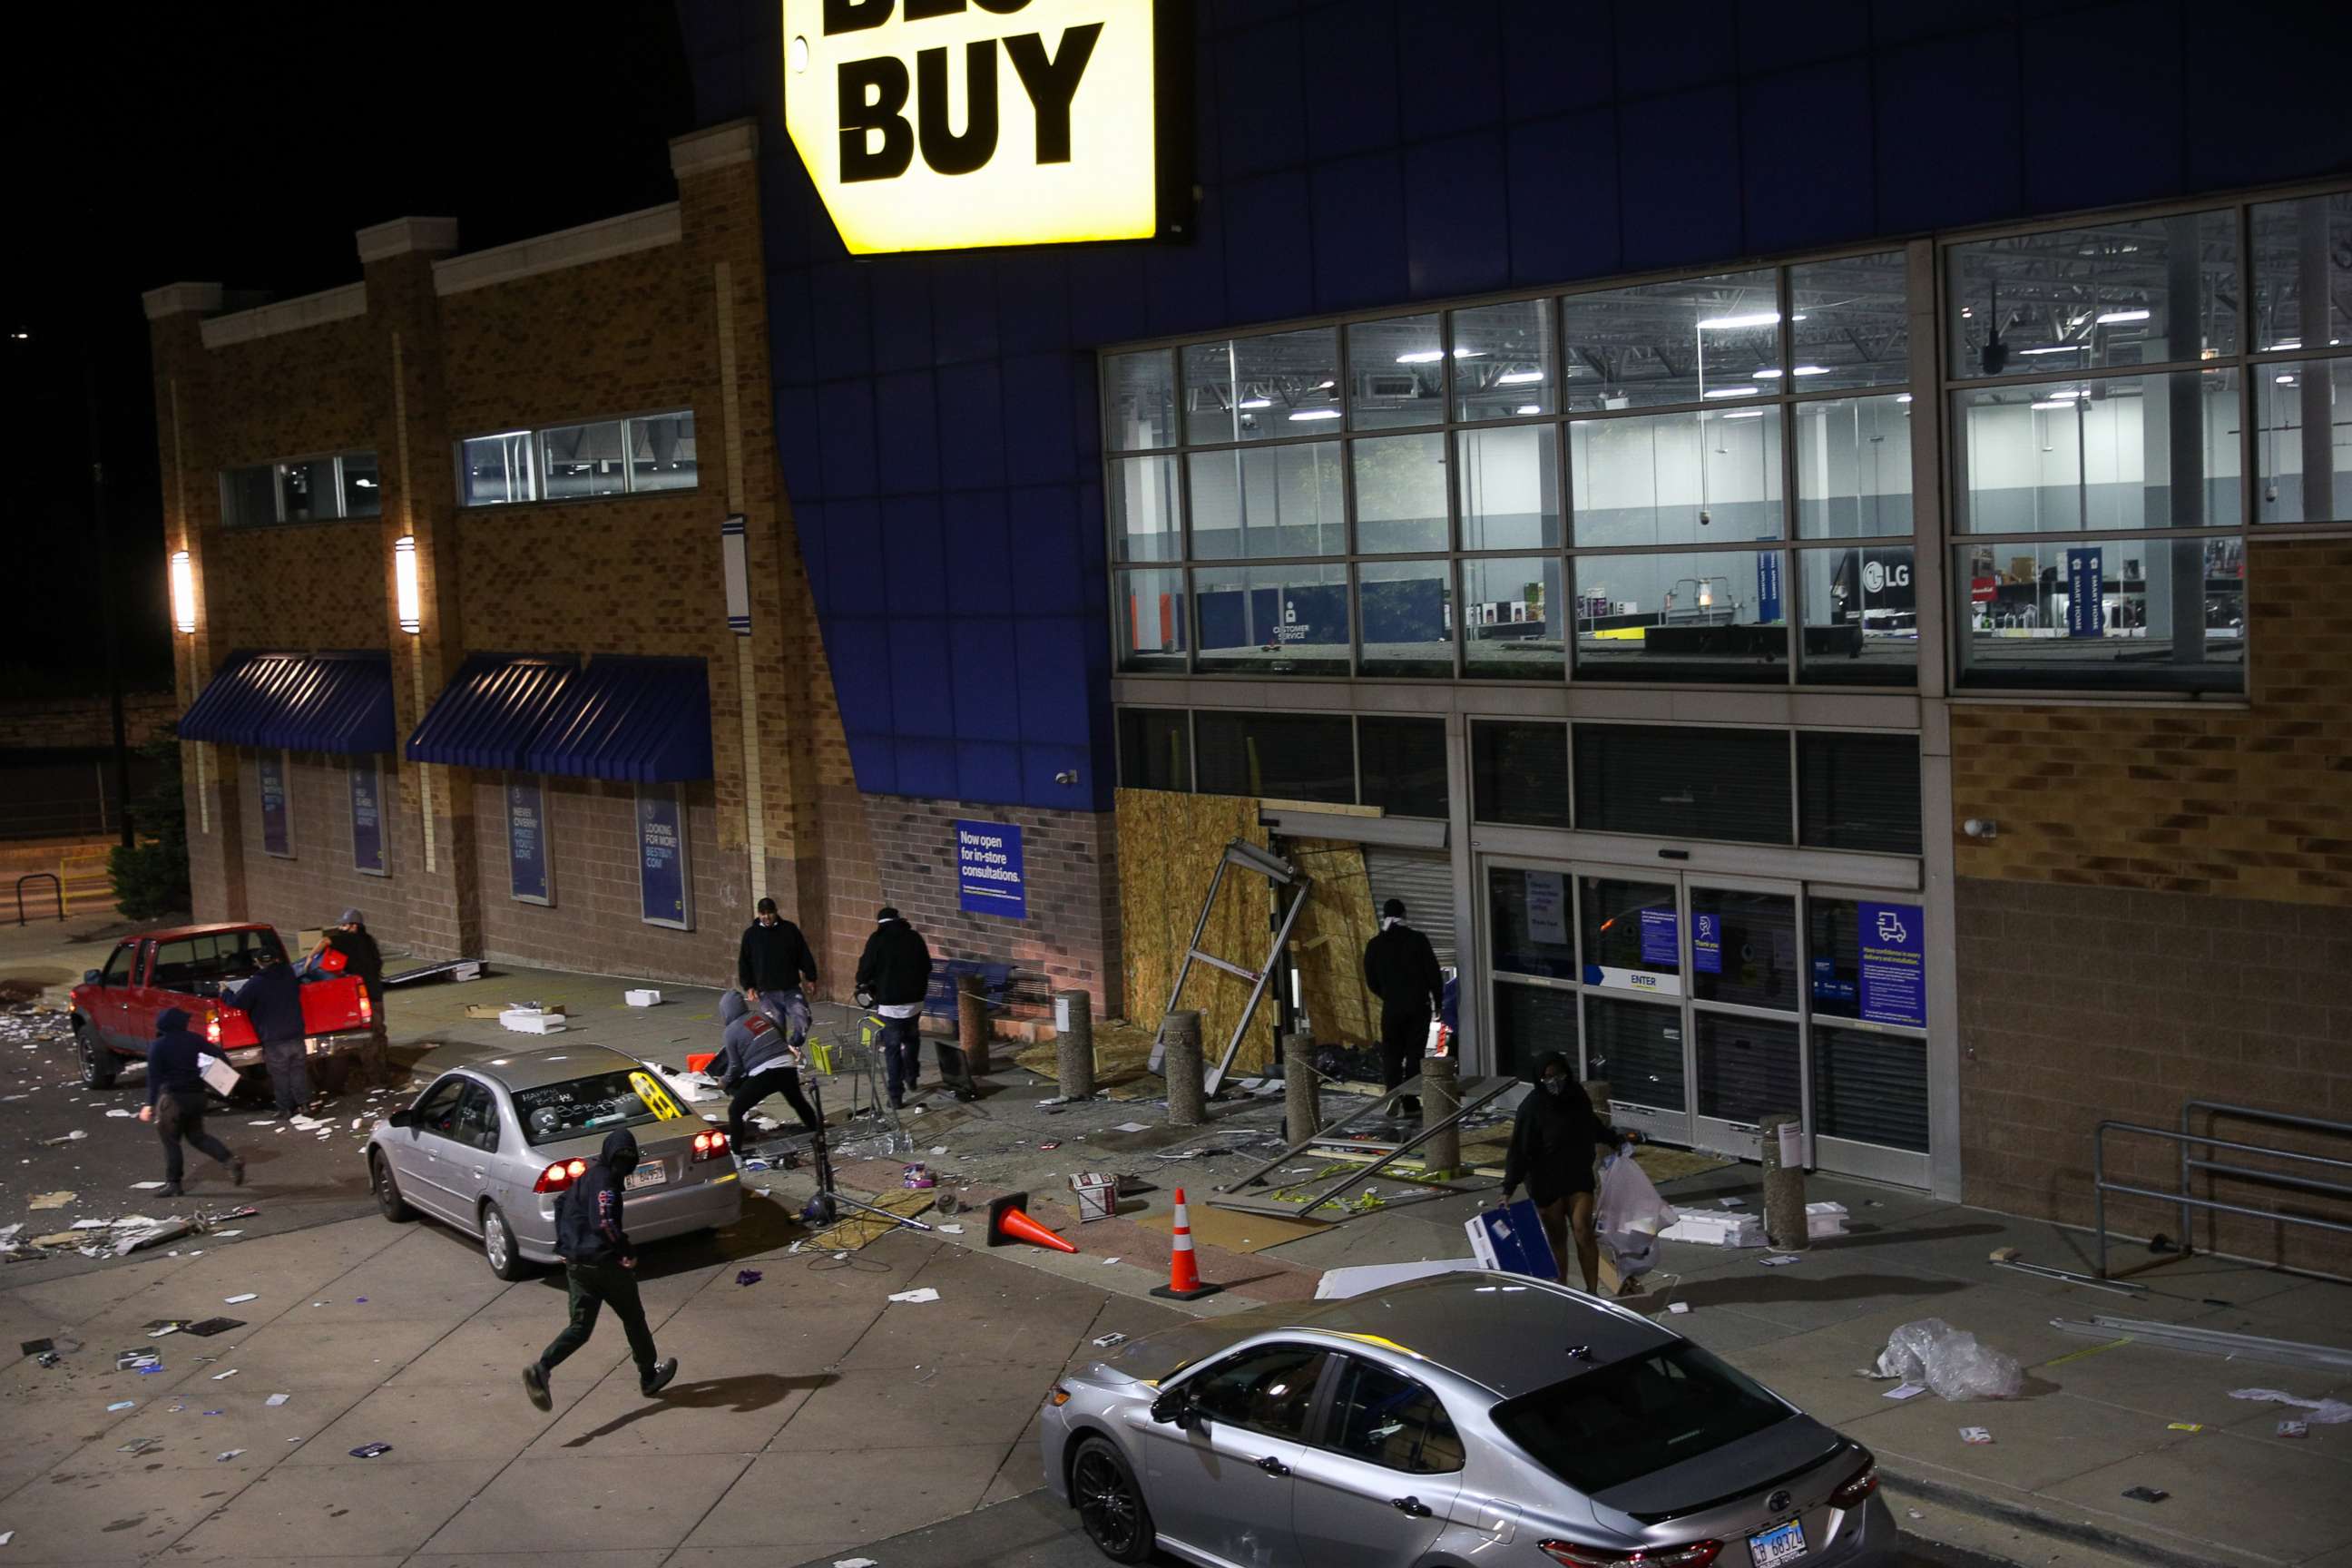 PHOTO: A Best Buy store with broken entrance is seen while people are taking electronics from inside the building in Chicago, Illinois, United States on June 1, 2020.